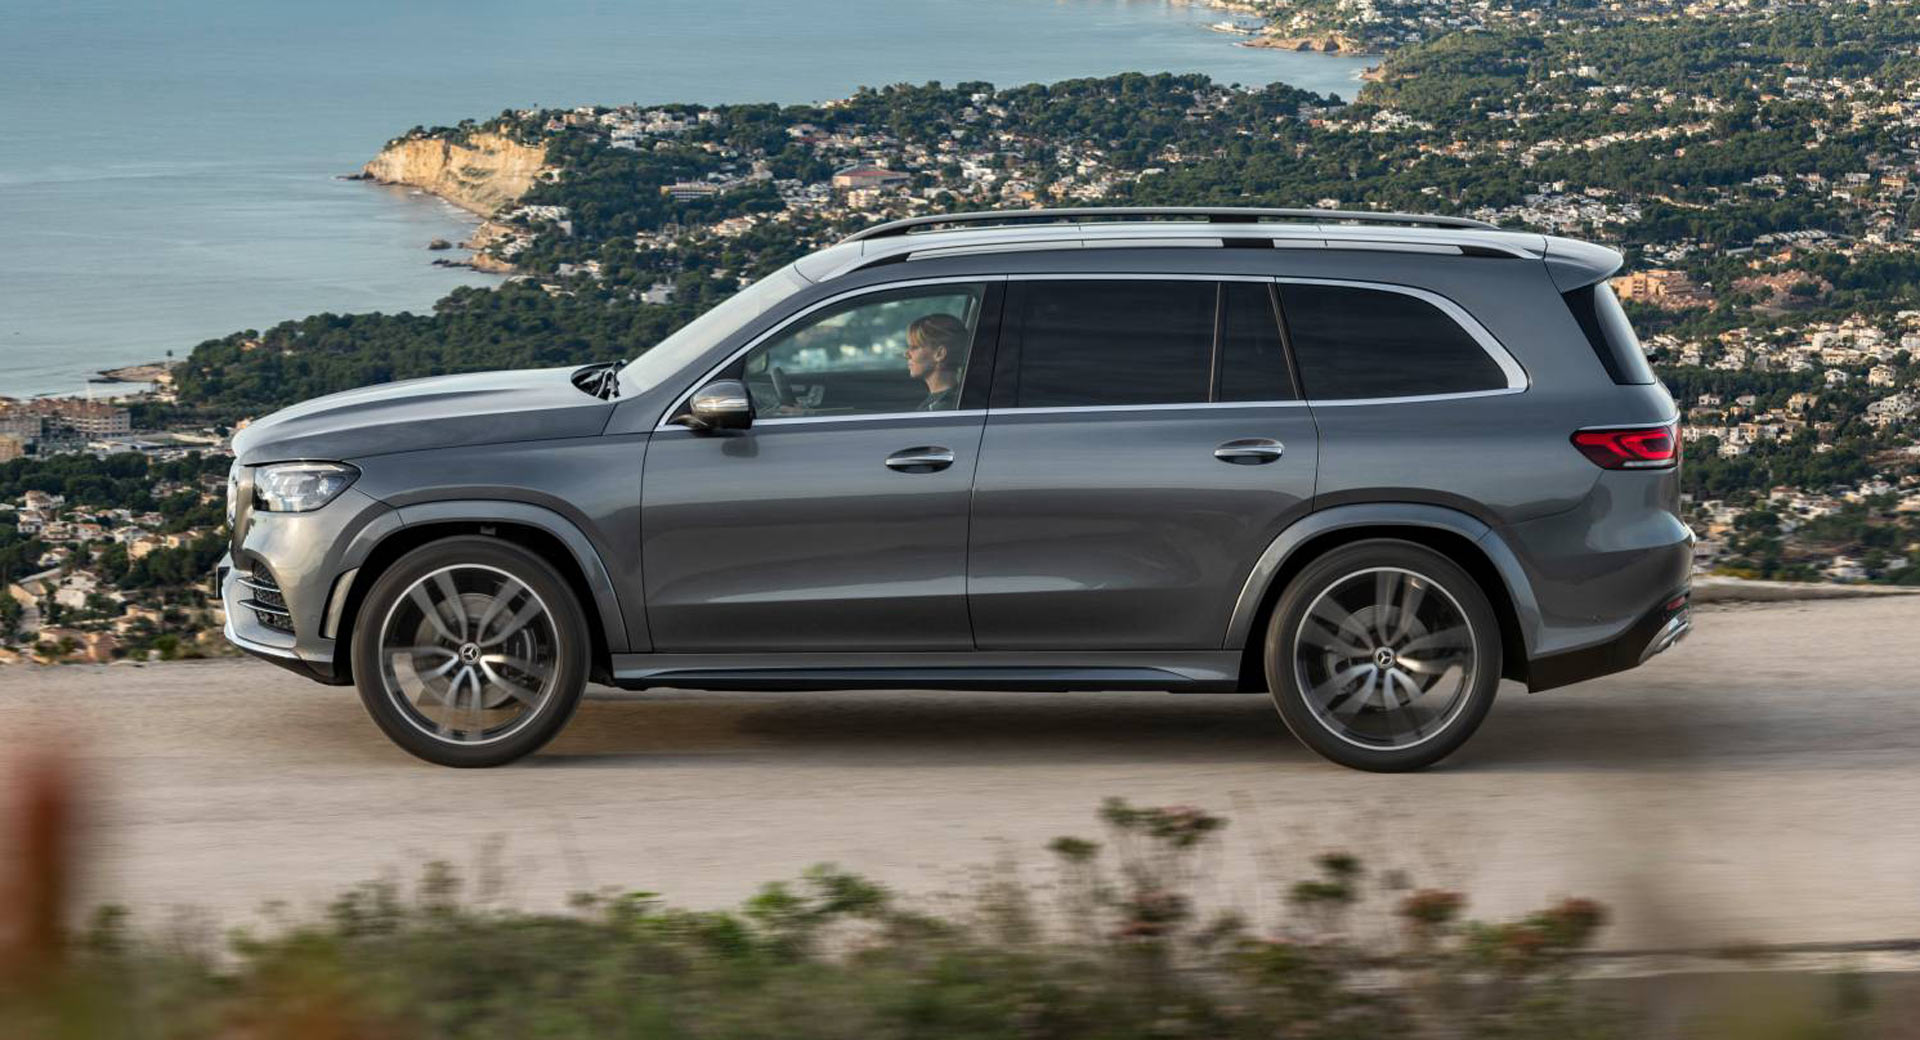 2020 Mercedes GLS Launches In Europe With Two Diesel Options, Starts At ...